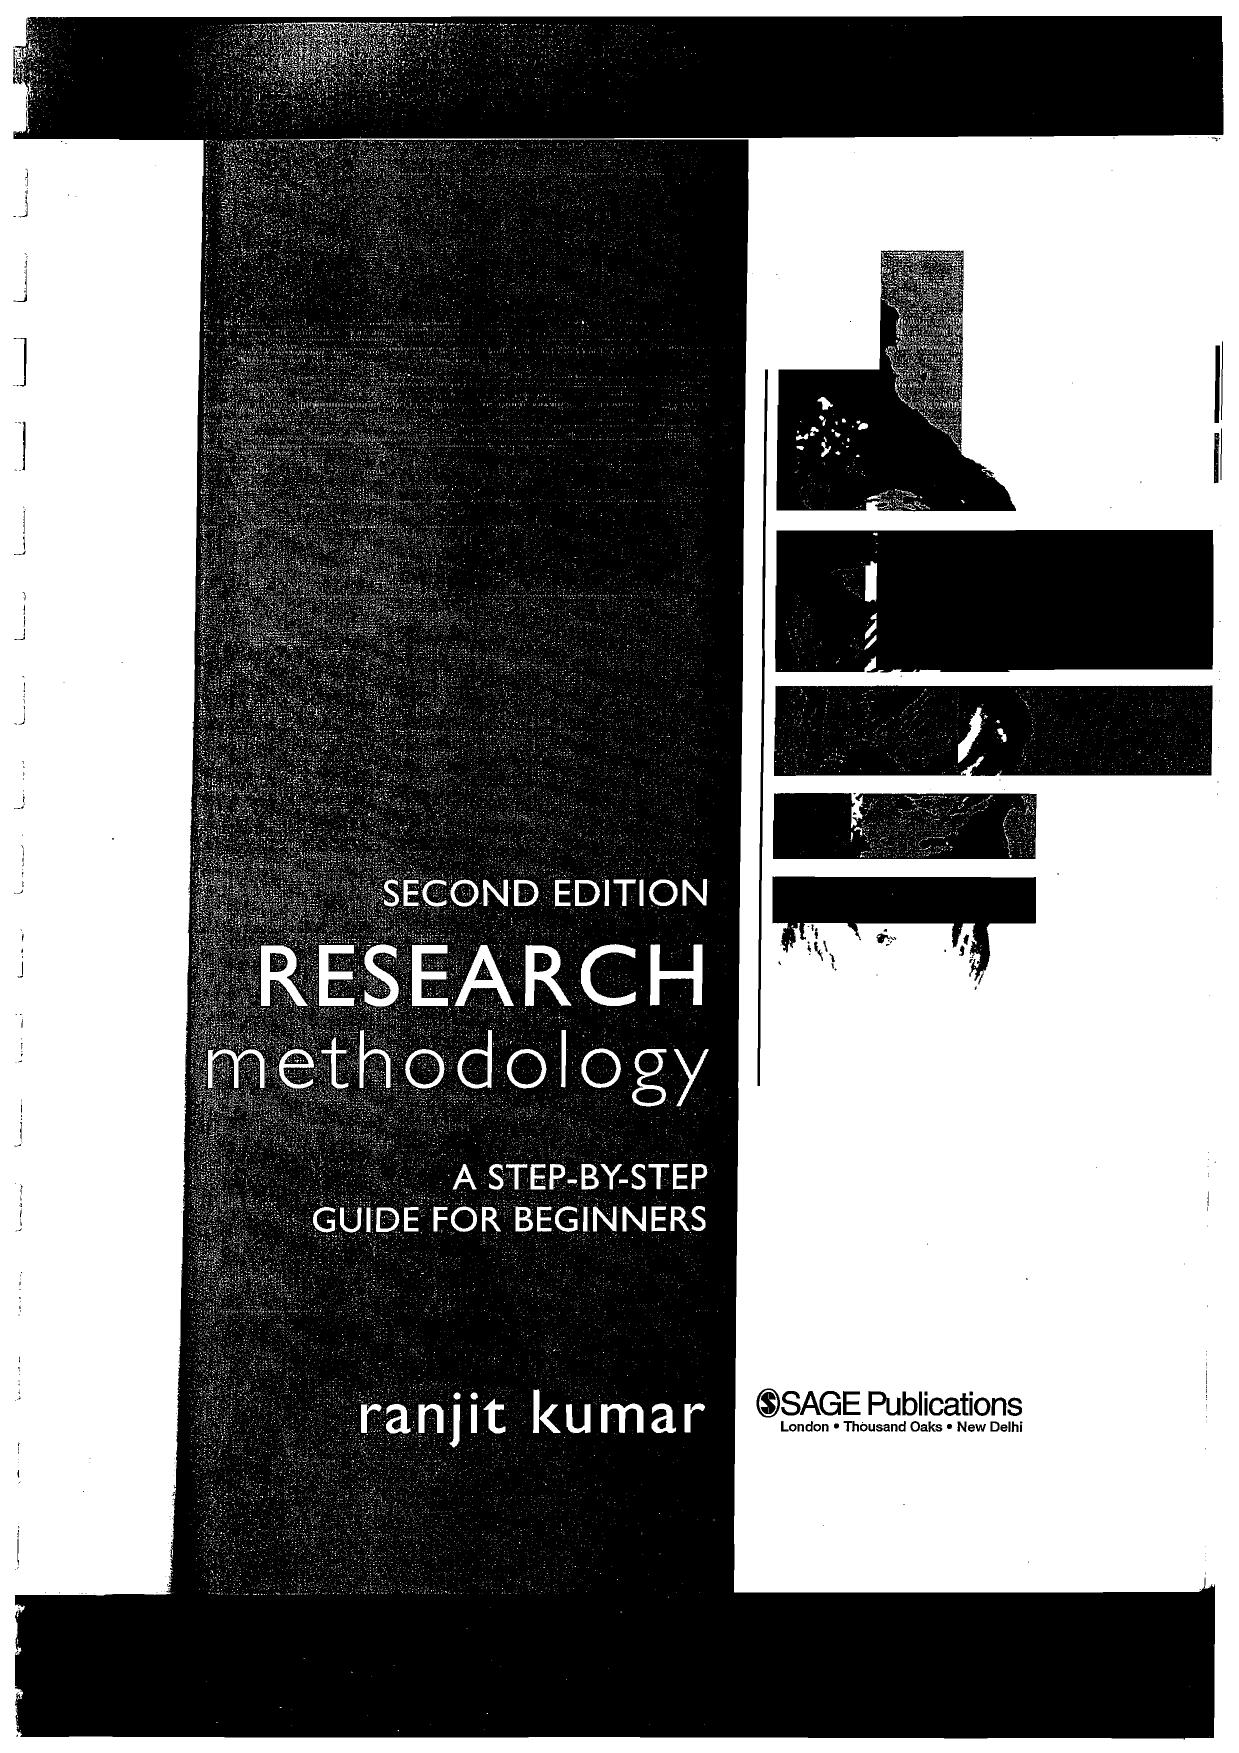 Research methodology  A step-by-step guide for beginners. 2nd edition